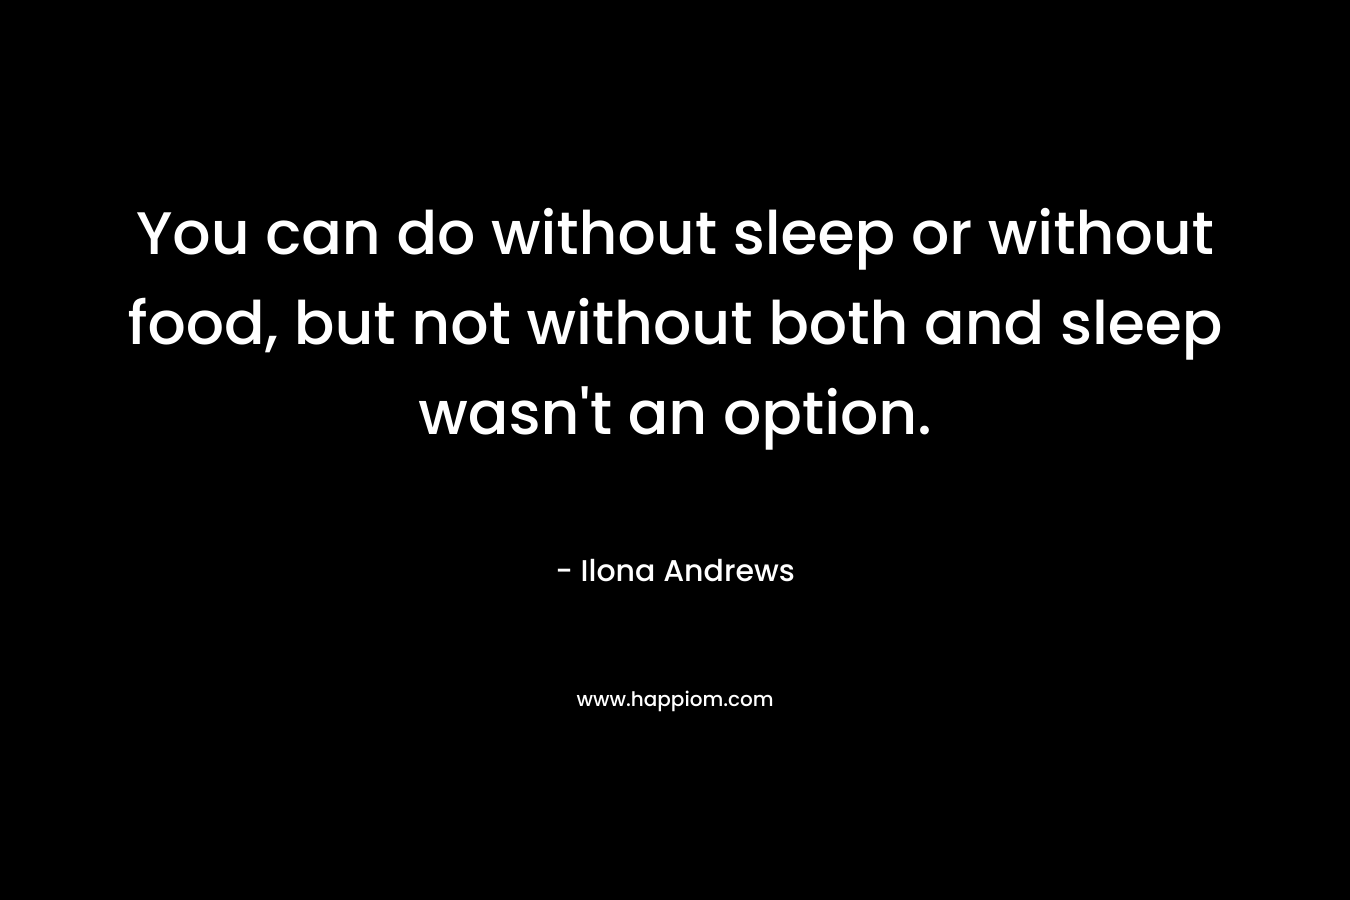 You can do without sleep or without food, but not without both and sleep wasn’t an option. – Ilona Andrews